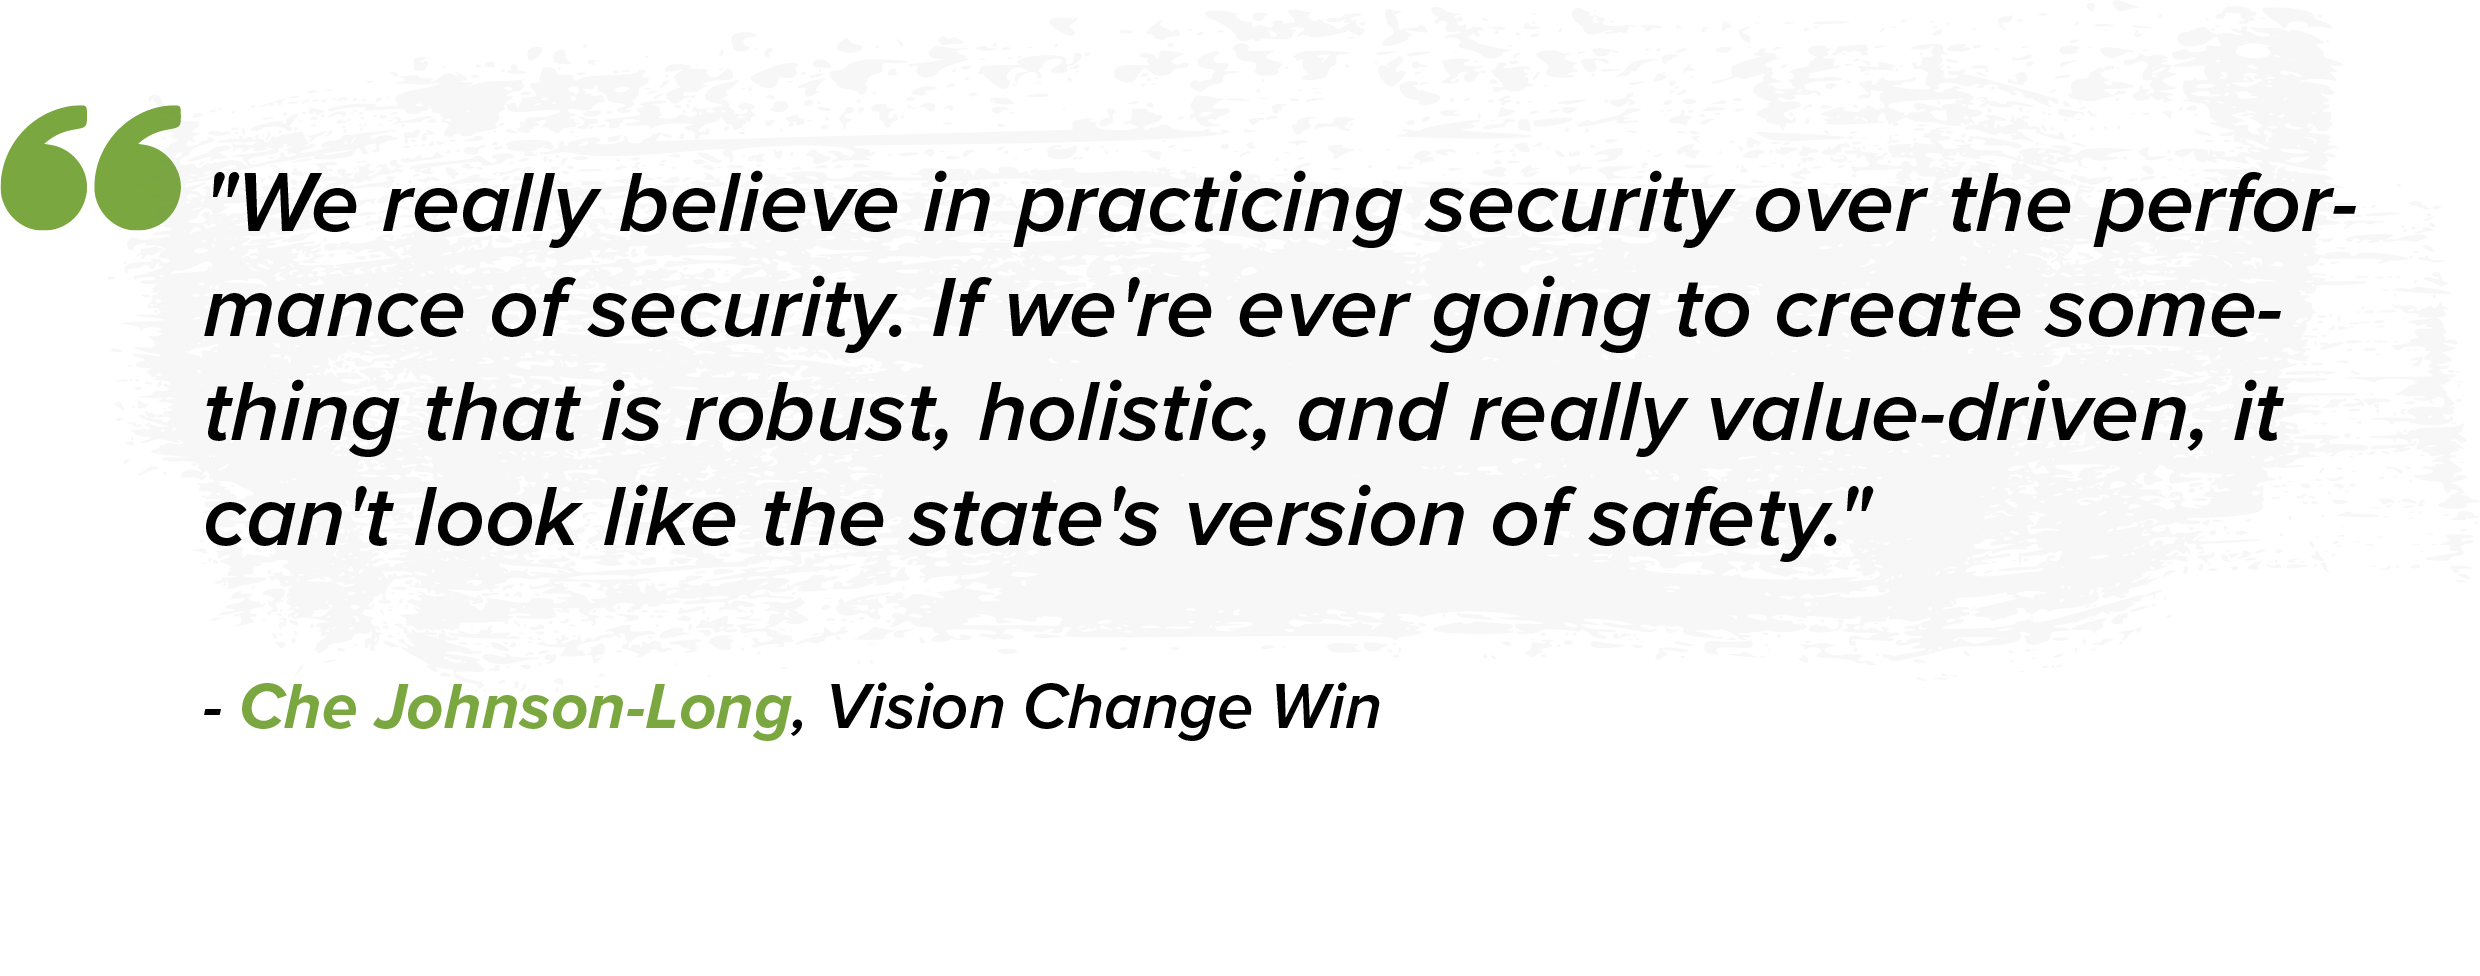 Quote from Che Johnson-Long, Vision Change Win